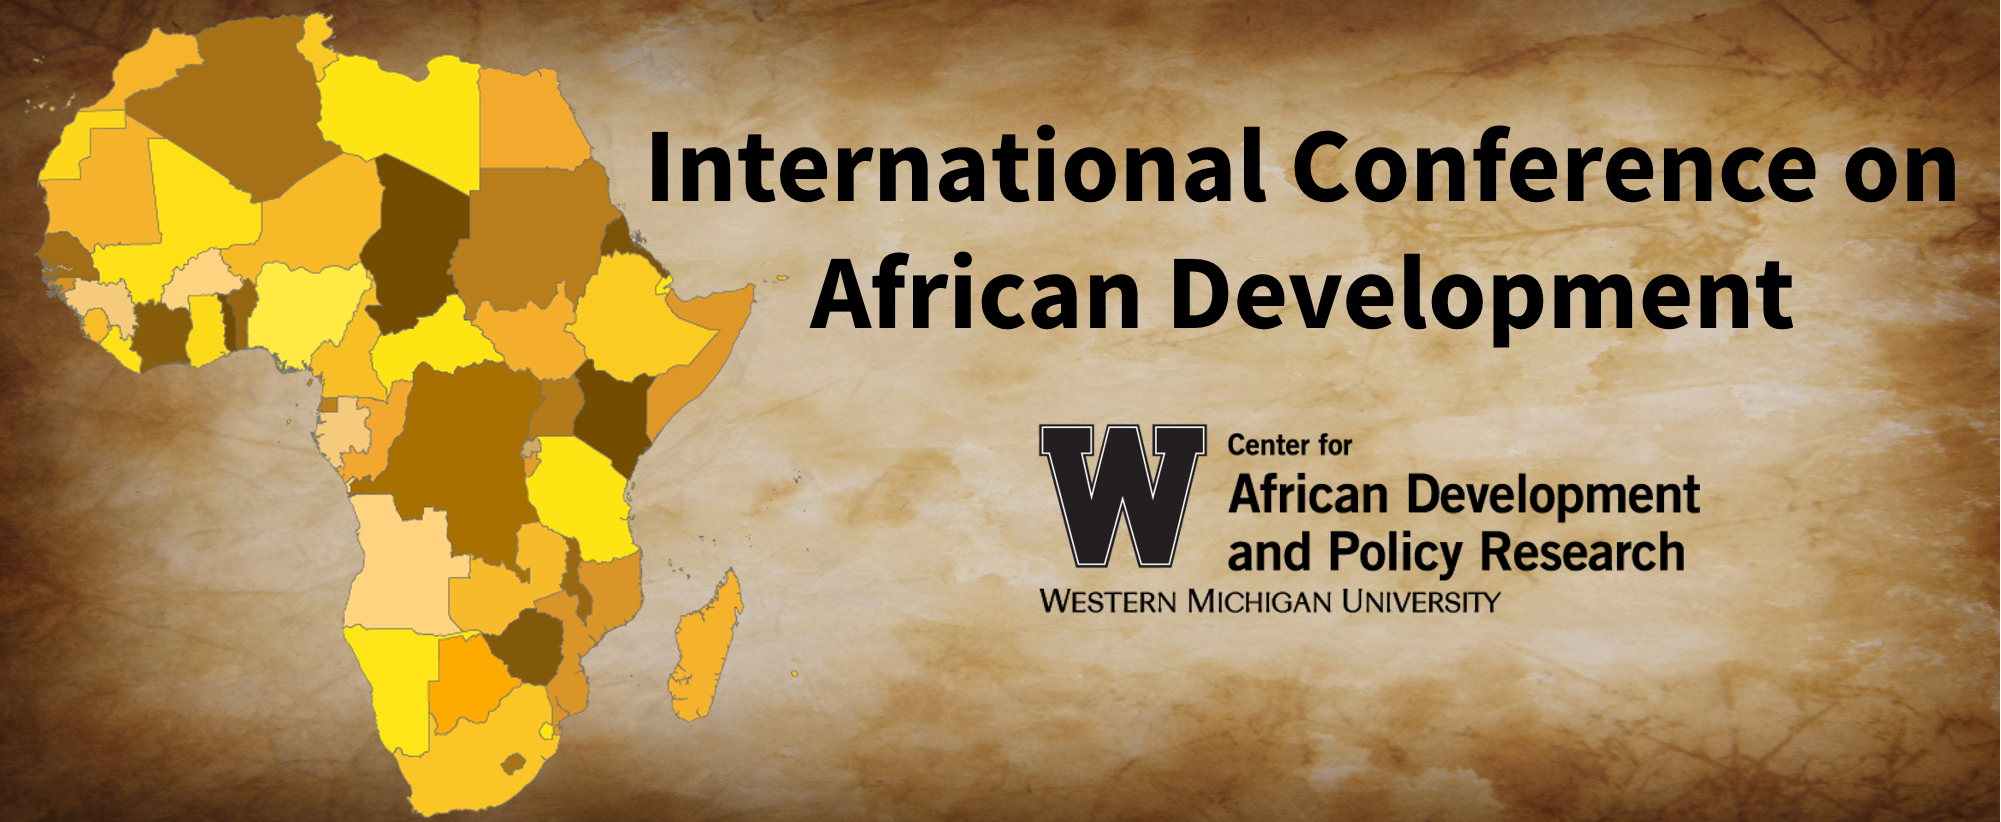 10th International Conference on African Development